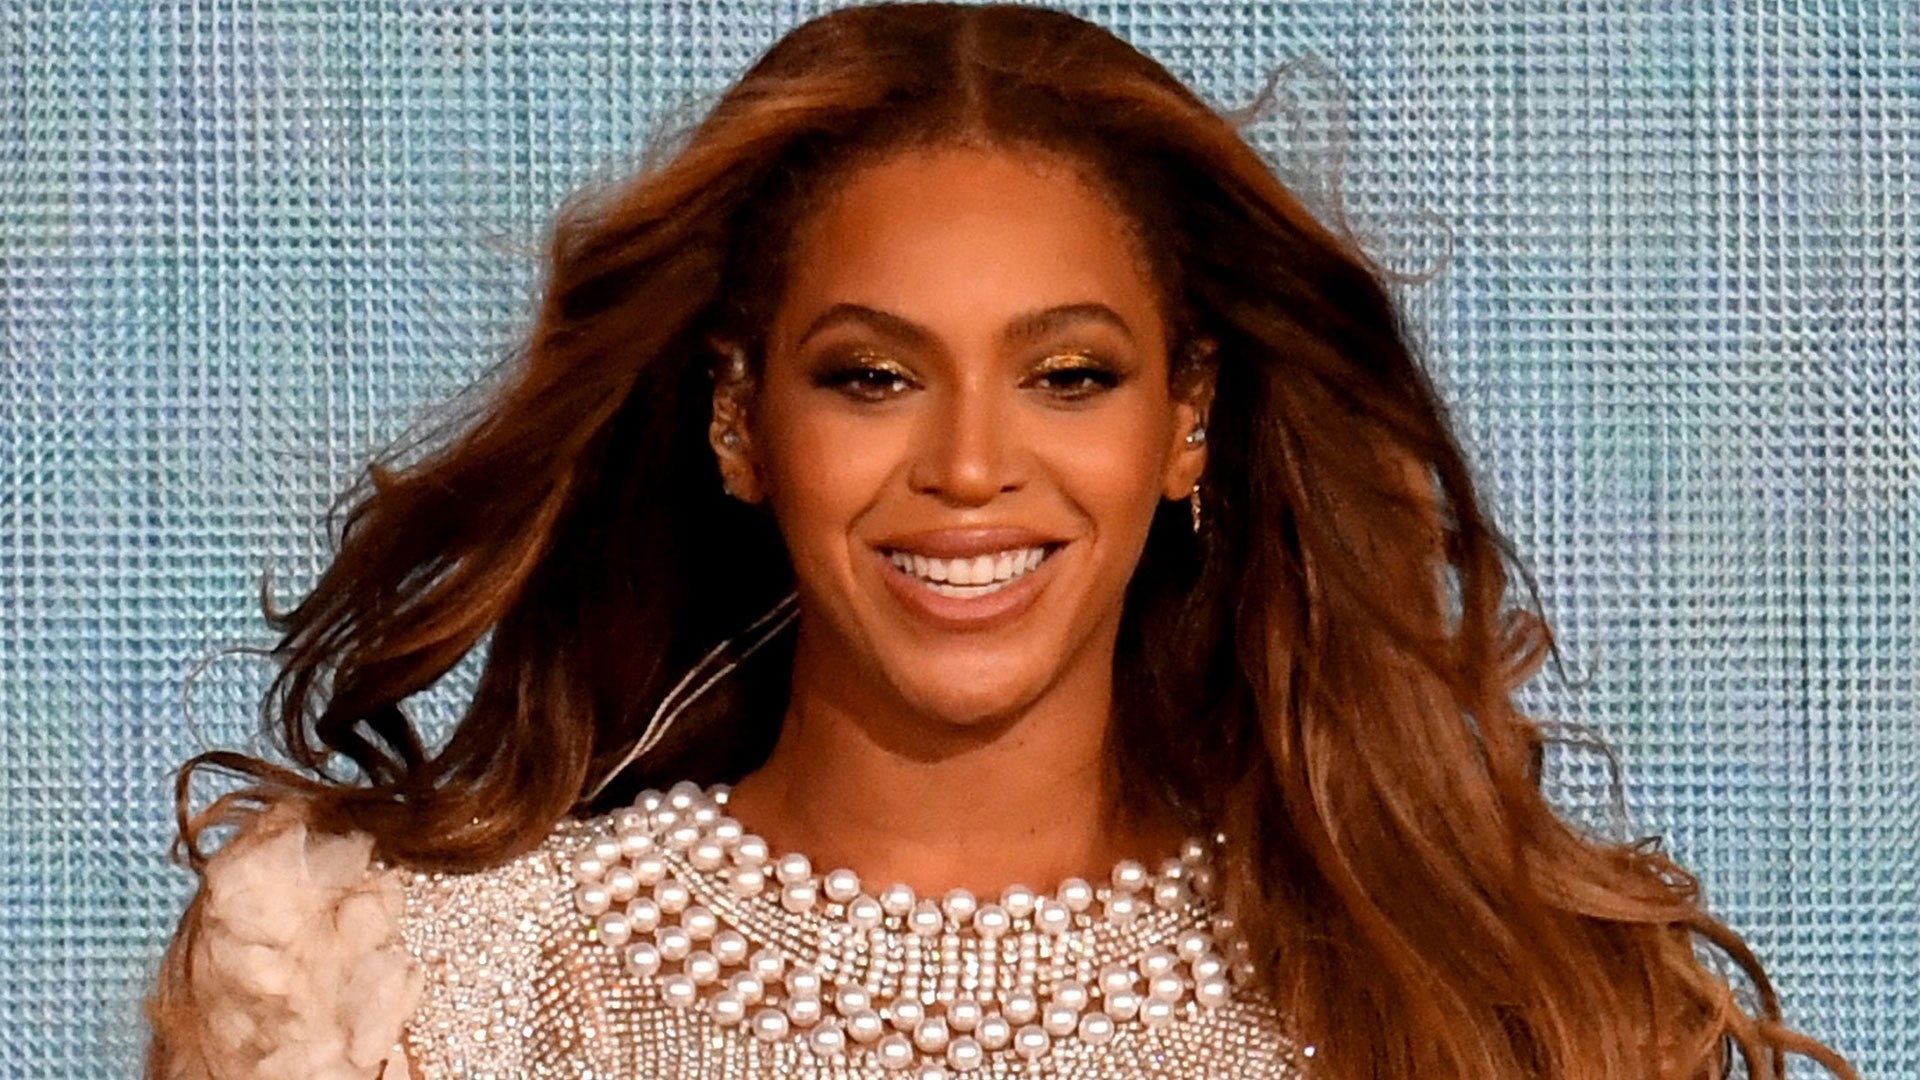 Beyonce's Natural Hair Revealed and It's Incredible